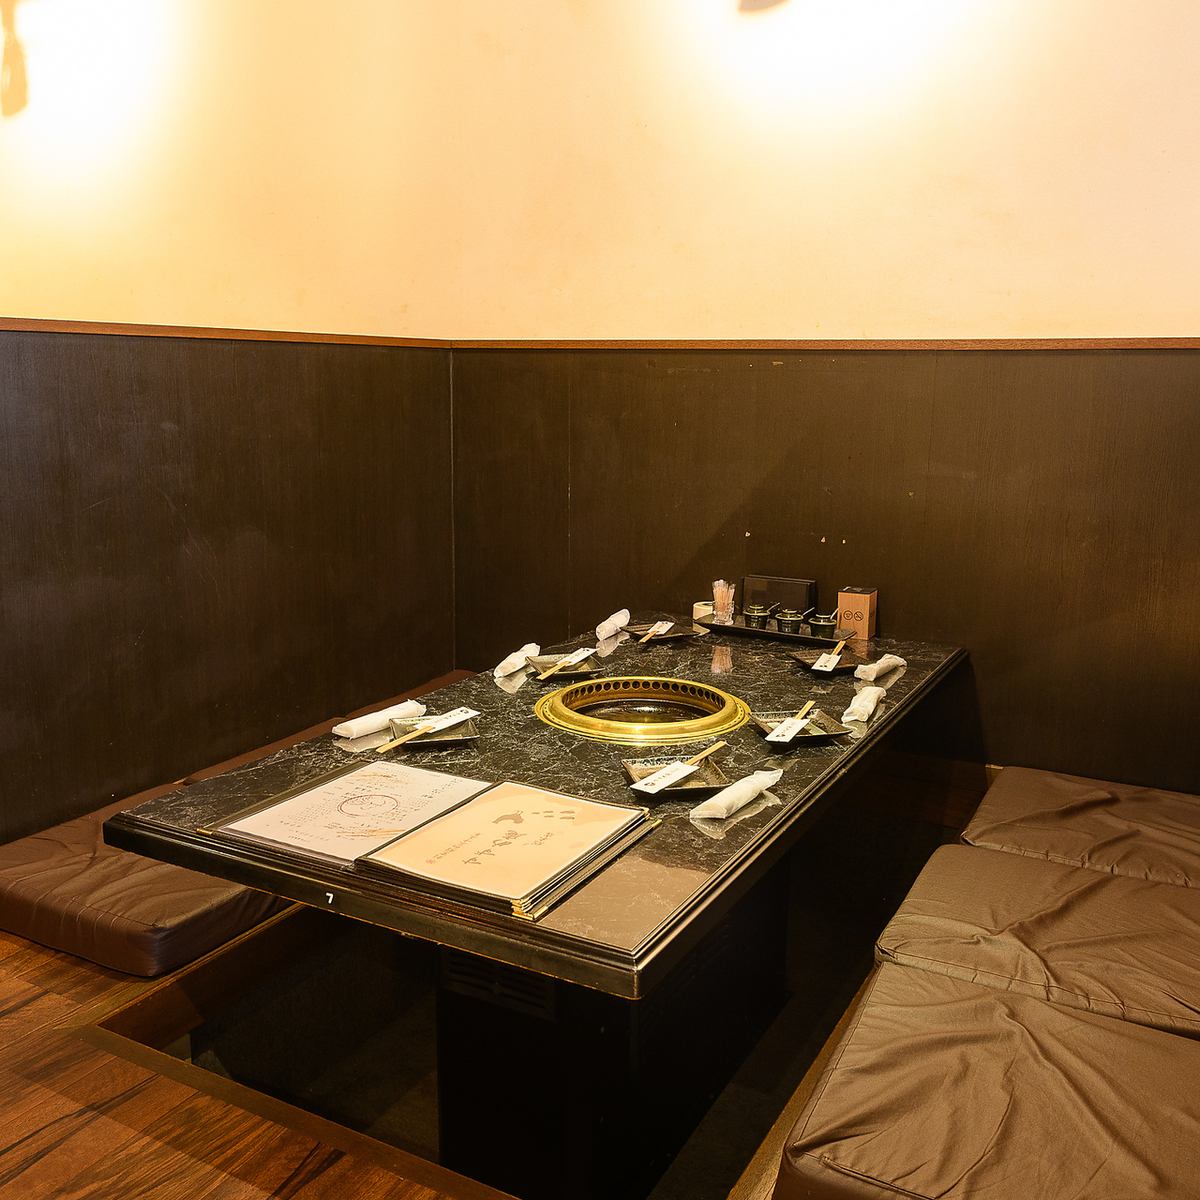 It is also possible to remove the partitions of the tatami room depending on the number of people.